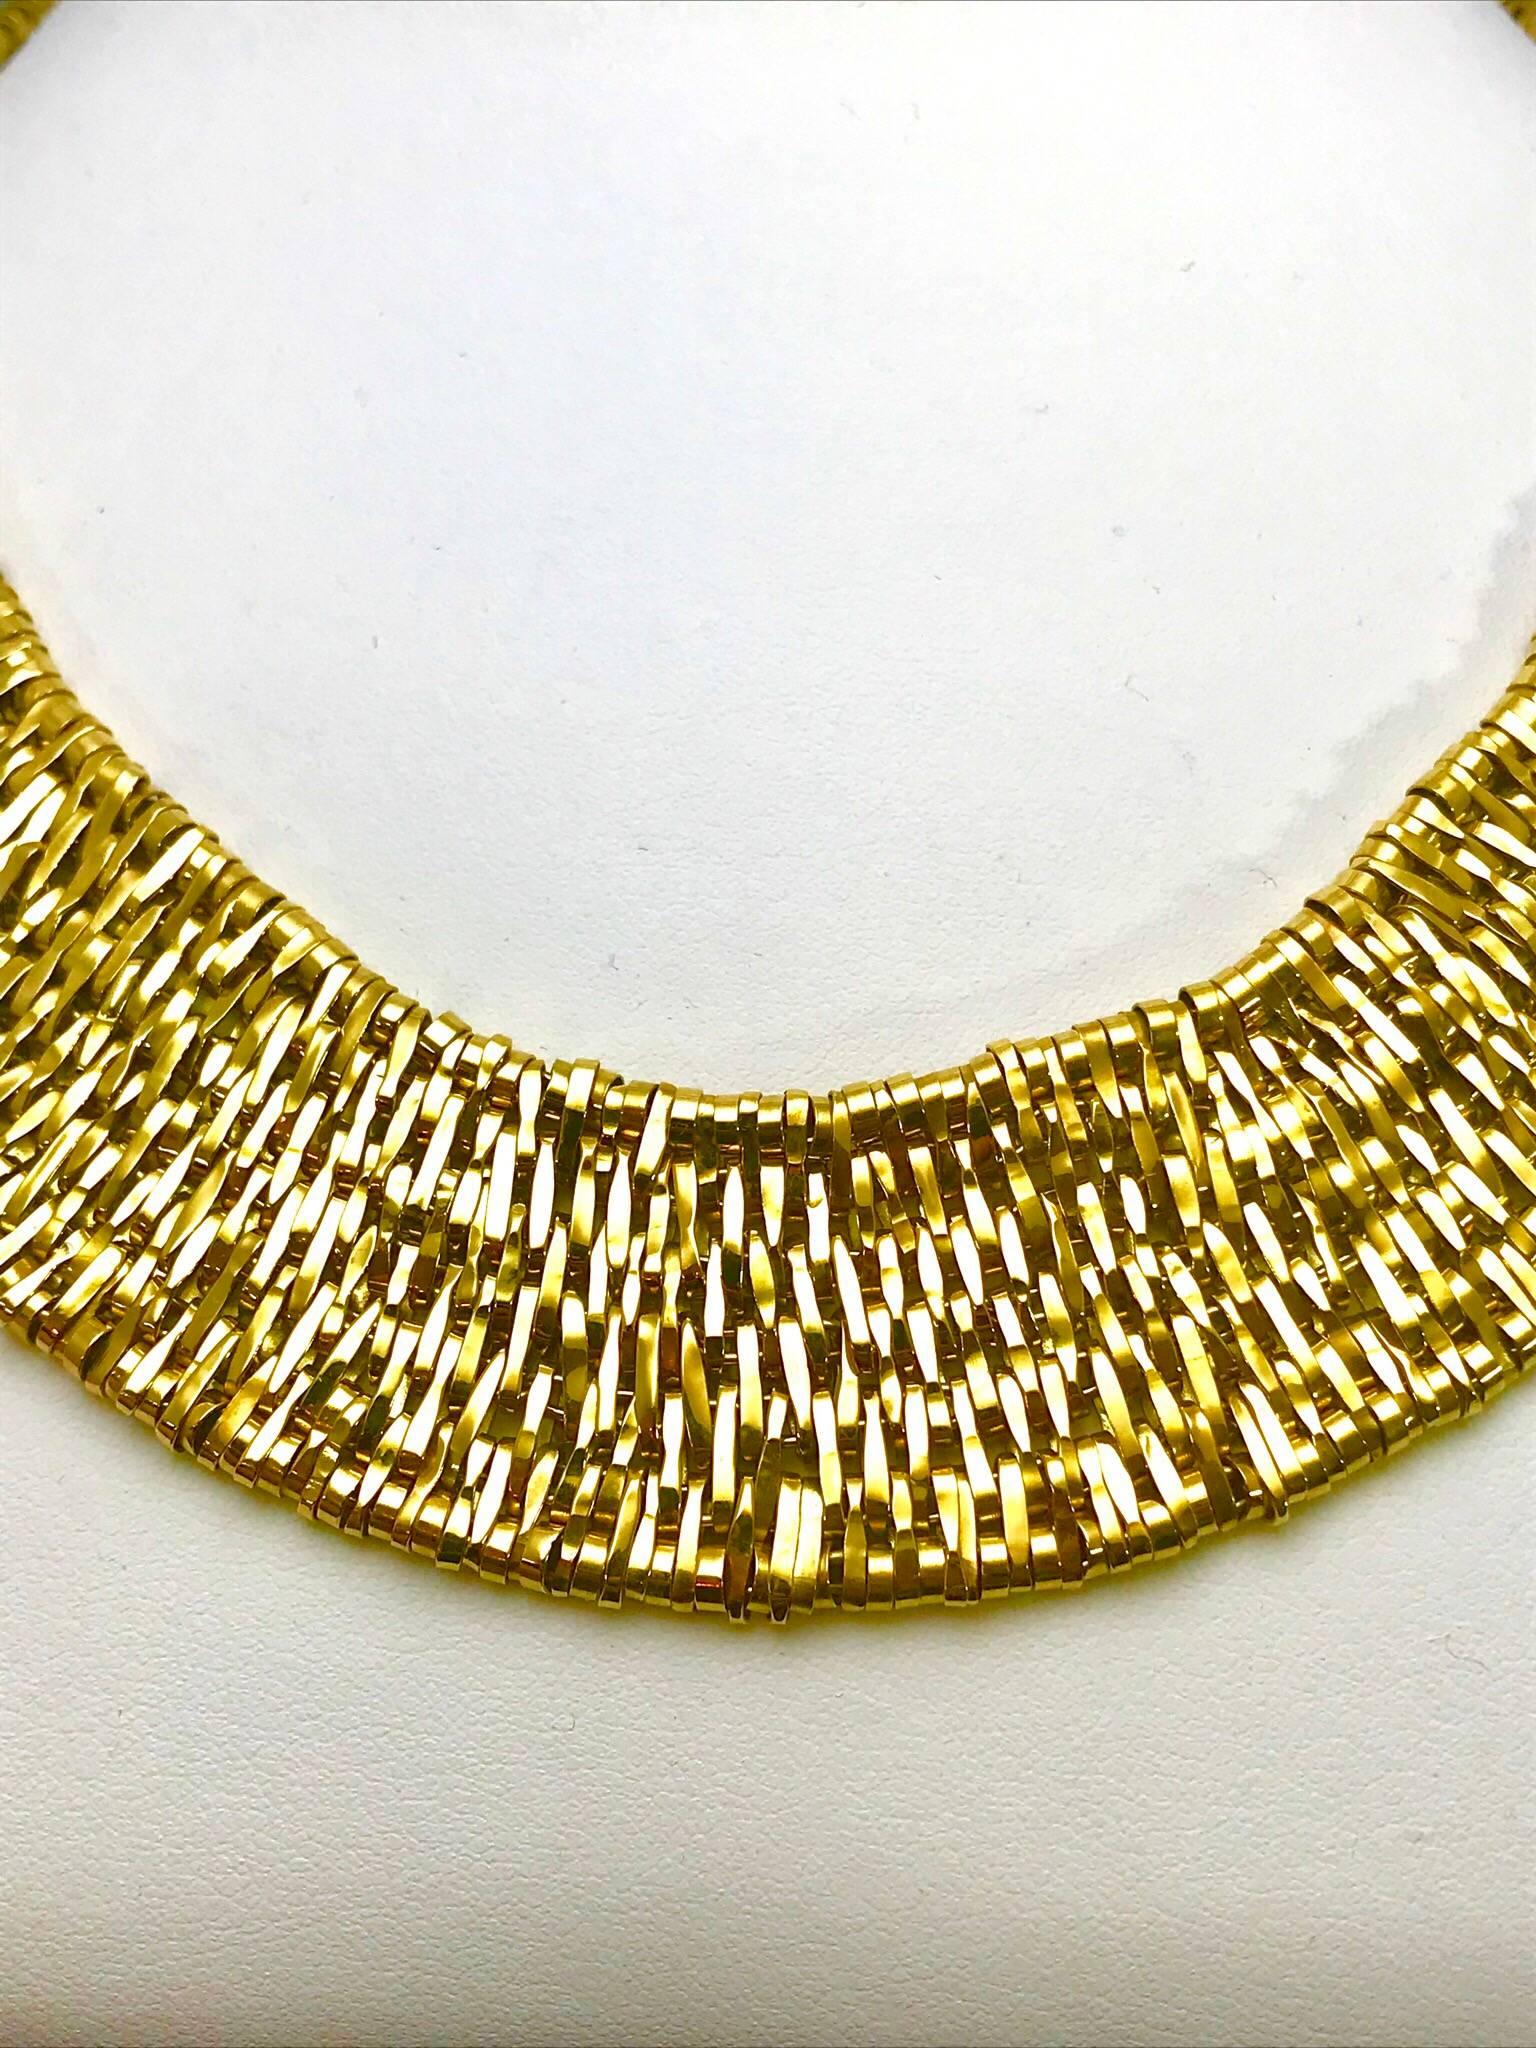 An Orlando Orlandini Fiandra wide woven link 18 karat yellow gold necklace.  The necklace is made up of small woven links, creating a very soft feel to the skin.  It has a push clasp with a safety lock.  161.43 grams.

Signature: 